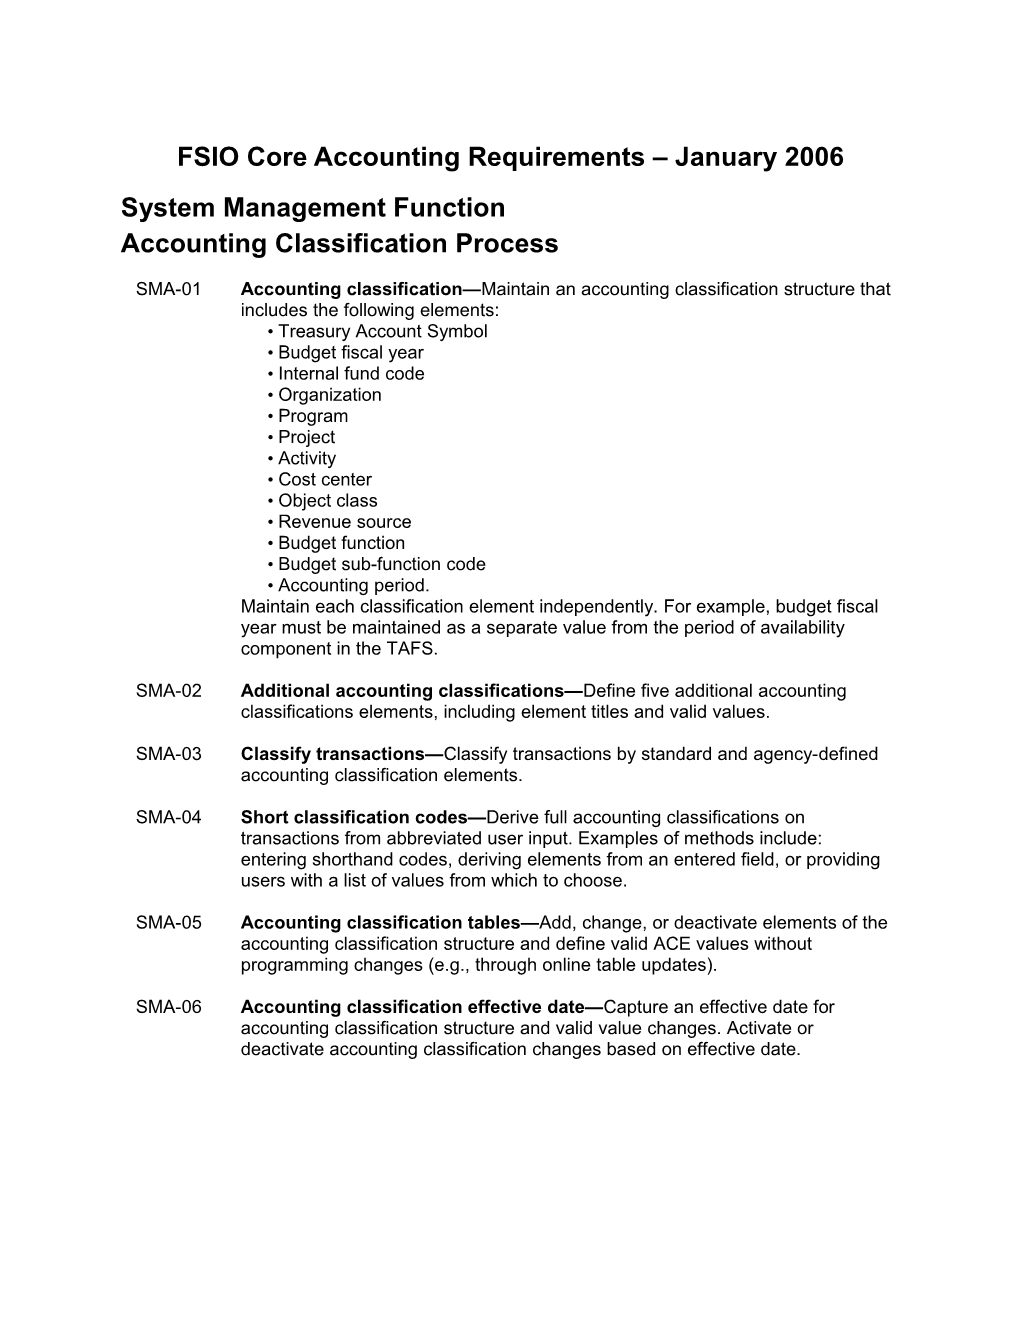 FSIO Core Accounting Requirements – January 2006